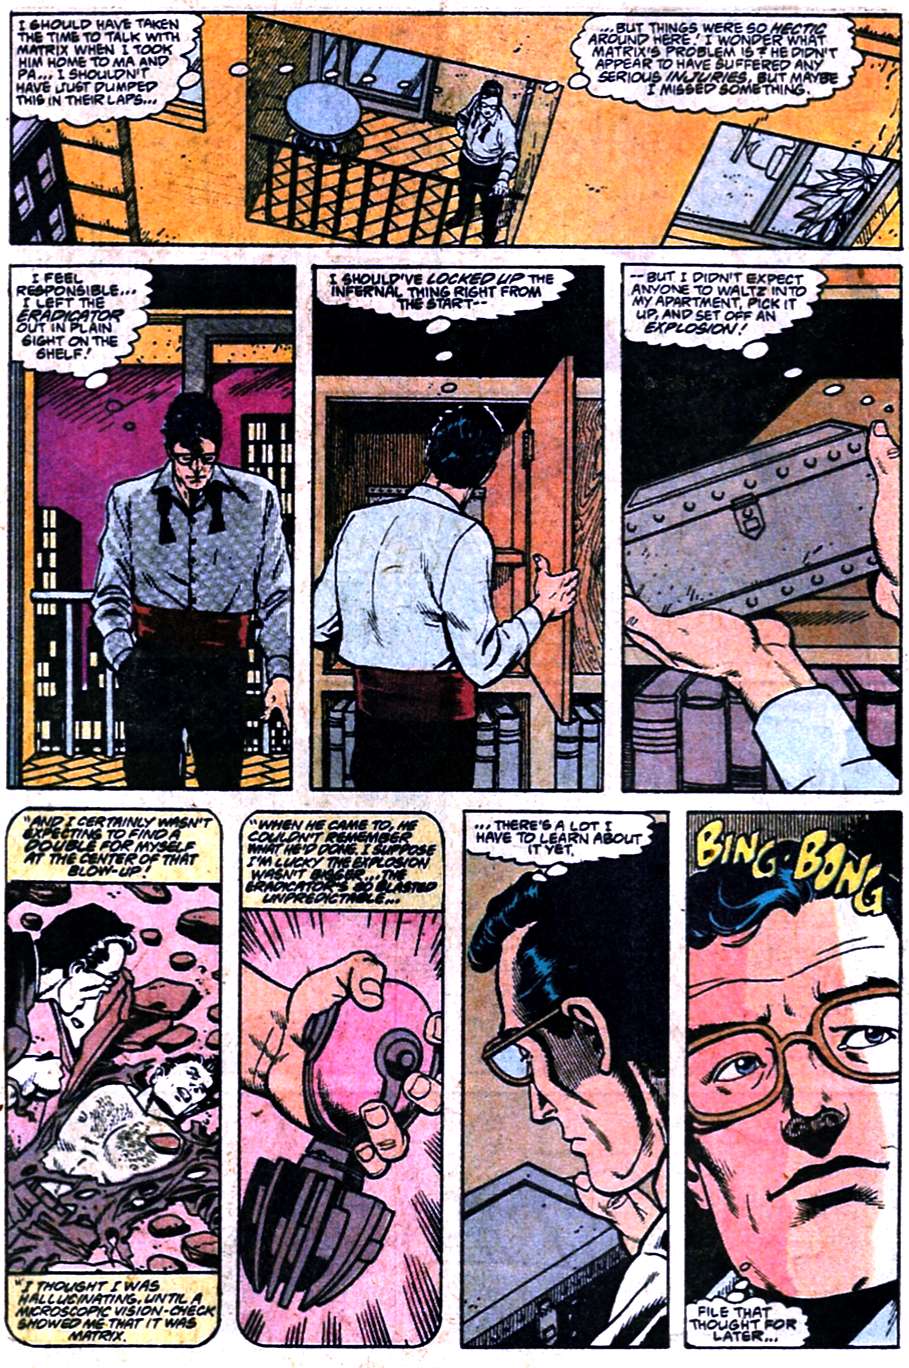 Adventures of Superman (1987) 457 Page 8